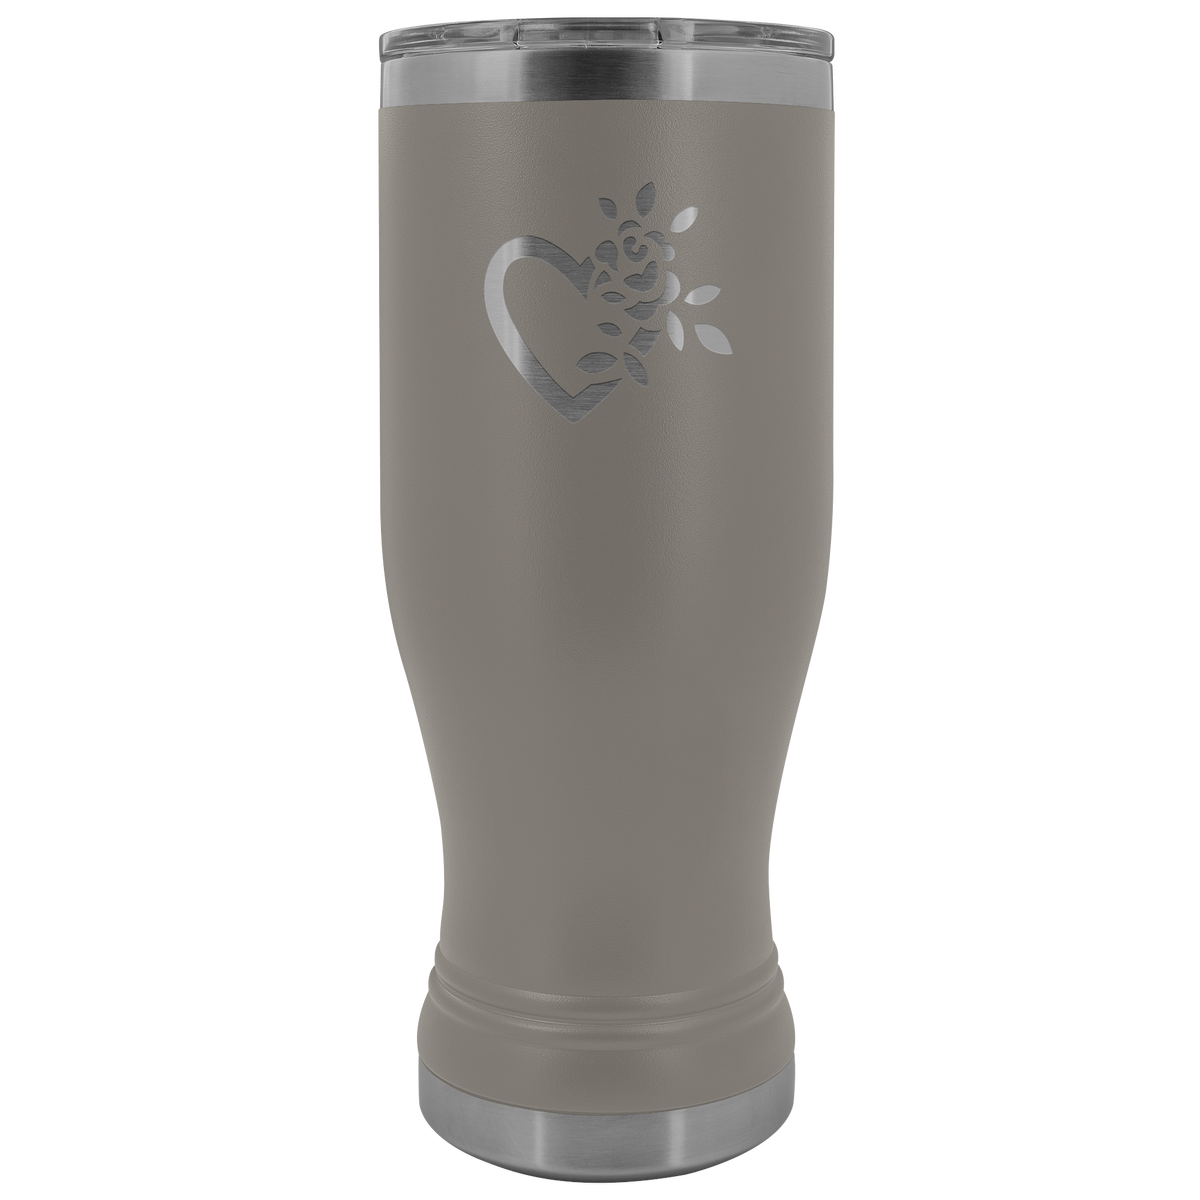 A flowering heart 20 oz stainless steel Vacuum insulated hot and cold beverage Tumbler